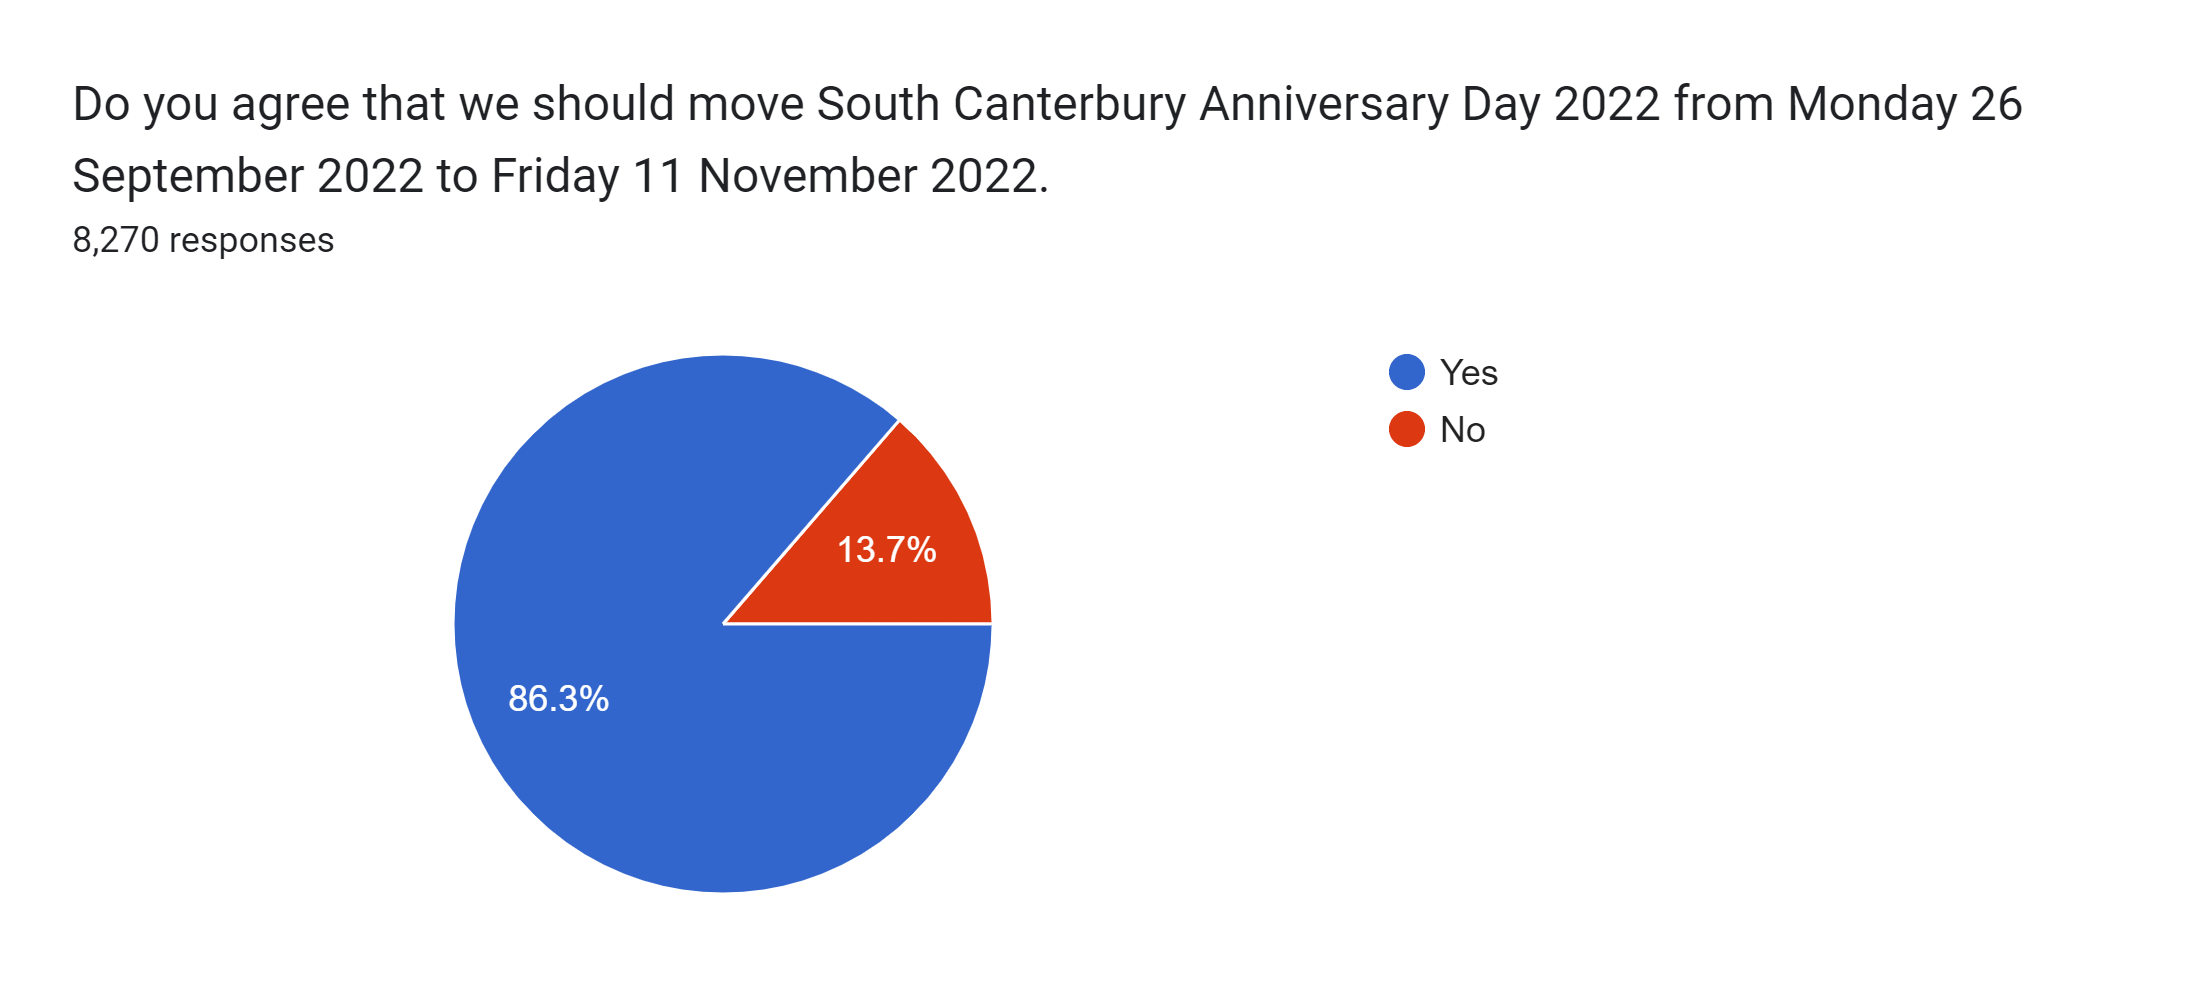 Image showing results of survey, with 86.3 percent of people supporting move of holiday to 11 November 2022